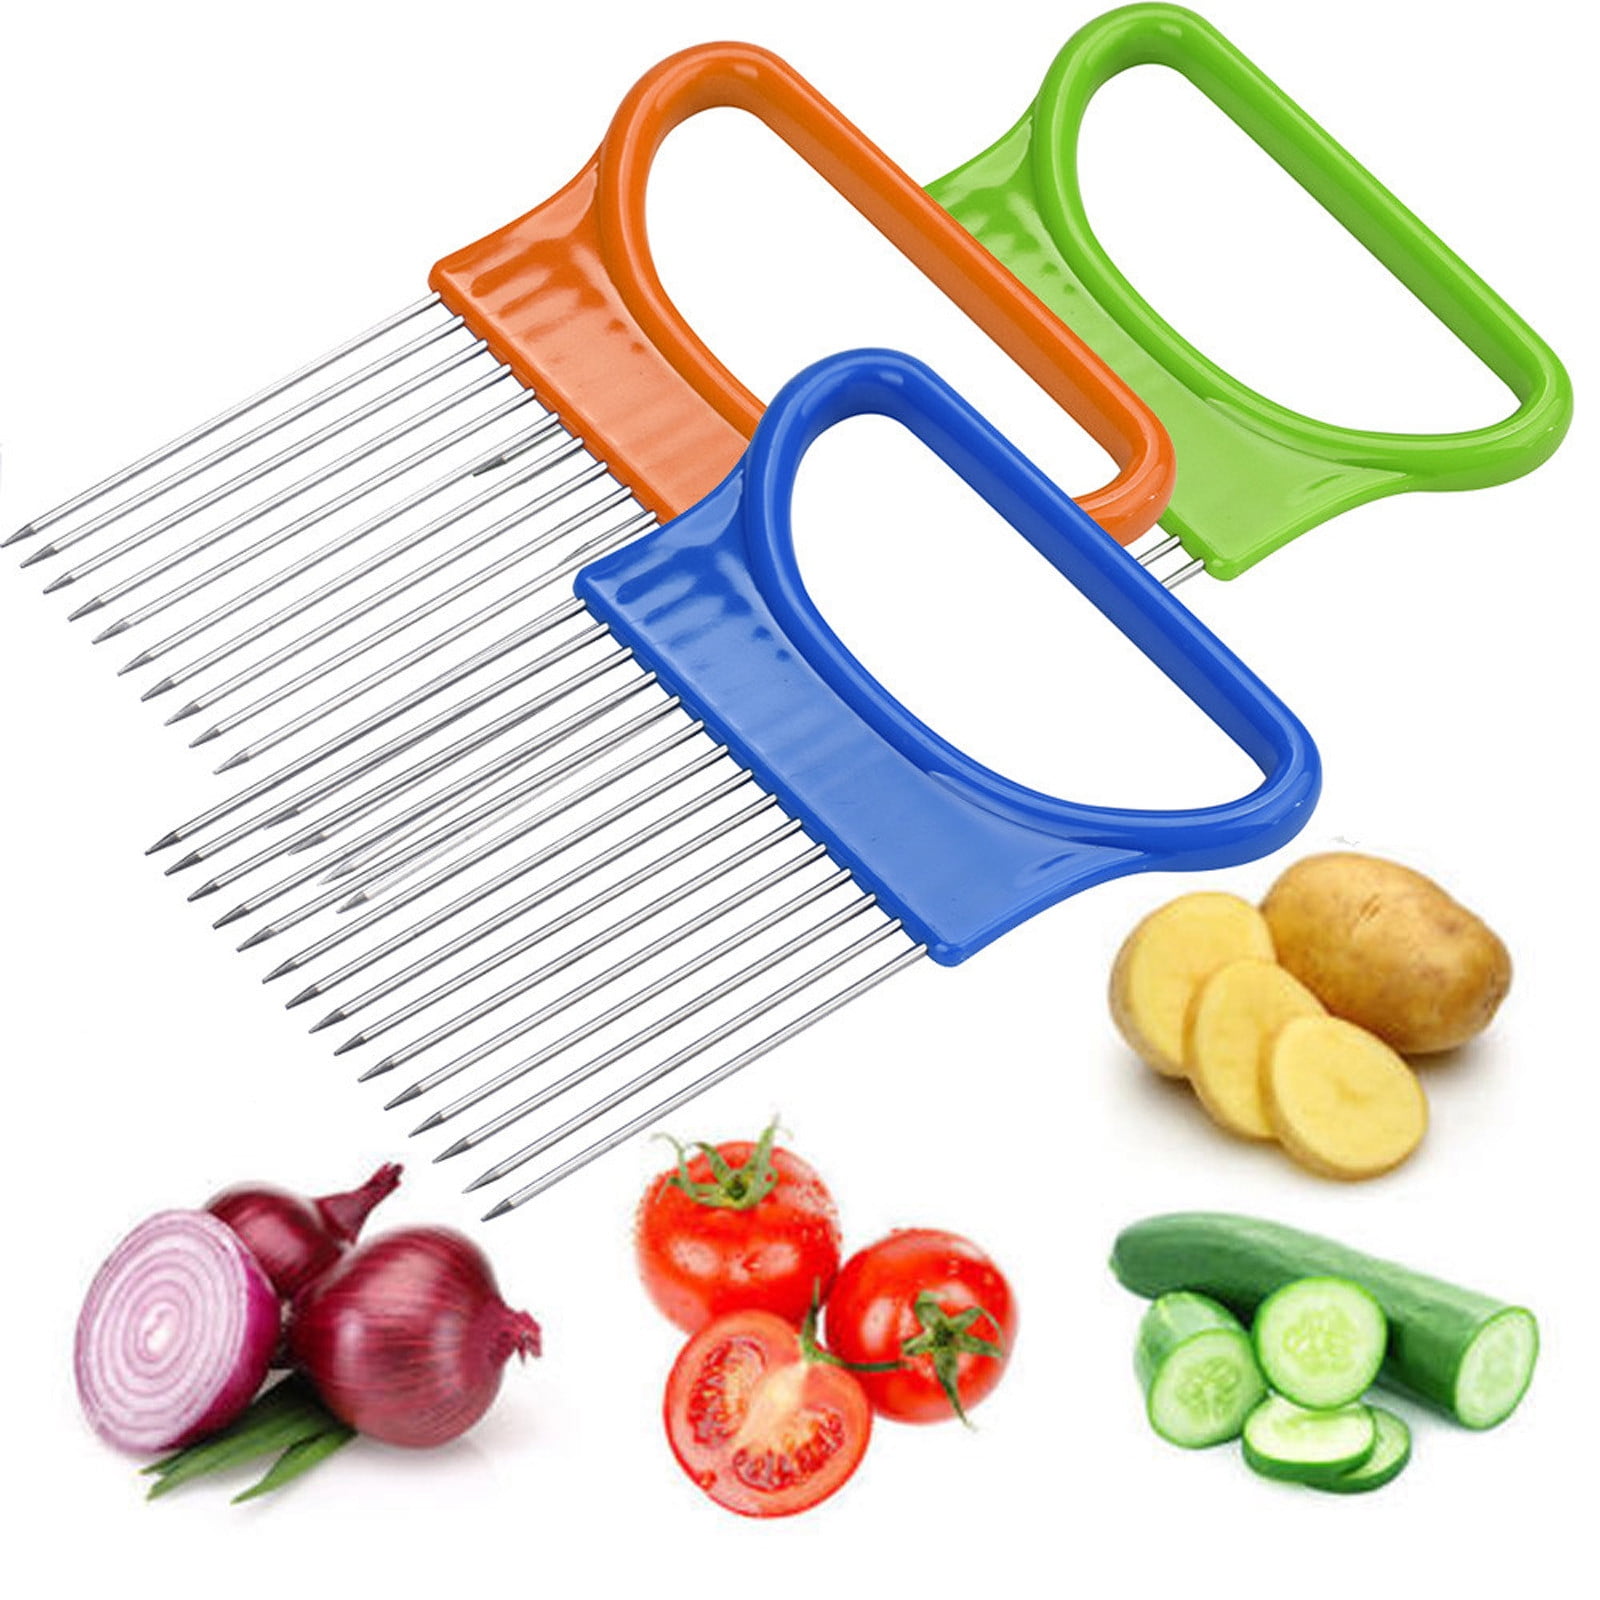 Tomato Vegetables Slicer Cutting Aid Holder Guide Cutter Stainless Steel LP 